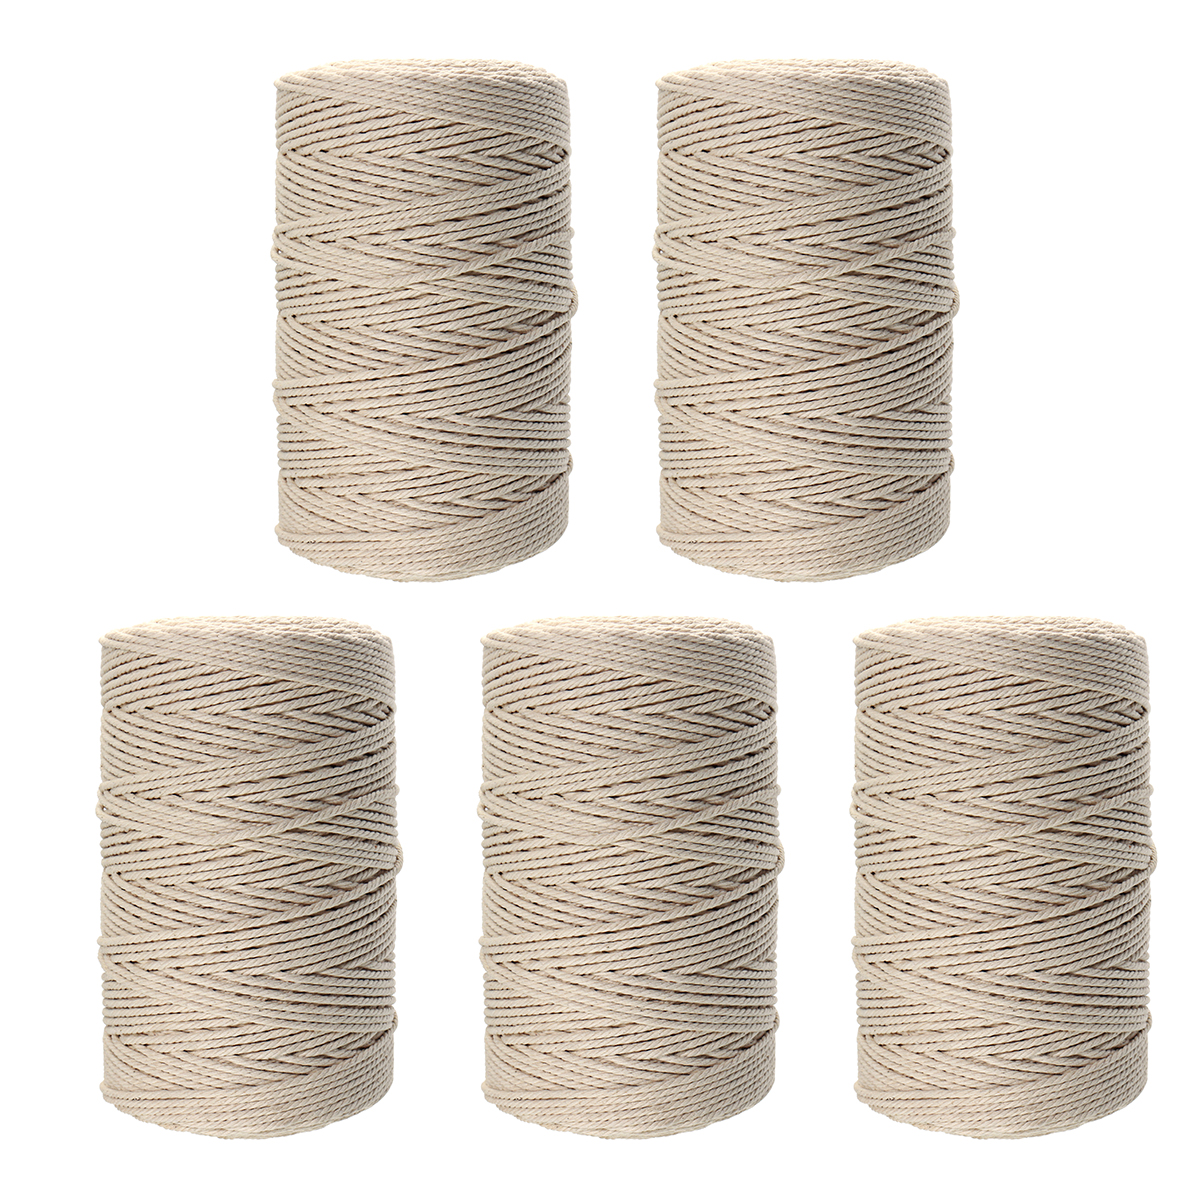 5Pcs-200Mx3mm-Natural-Beige-Cotton-Twisted-Cord-Rope-Braided-Wire-DIY-Craft-Macrame-String-1396554-2